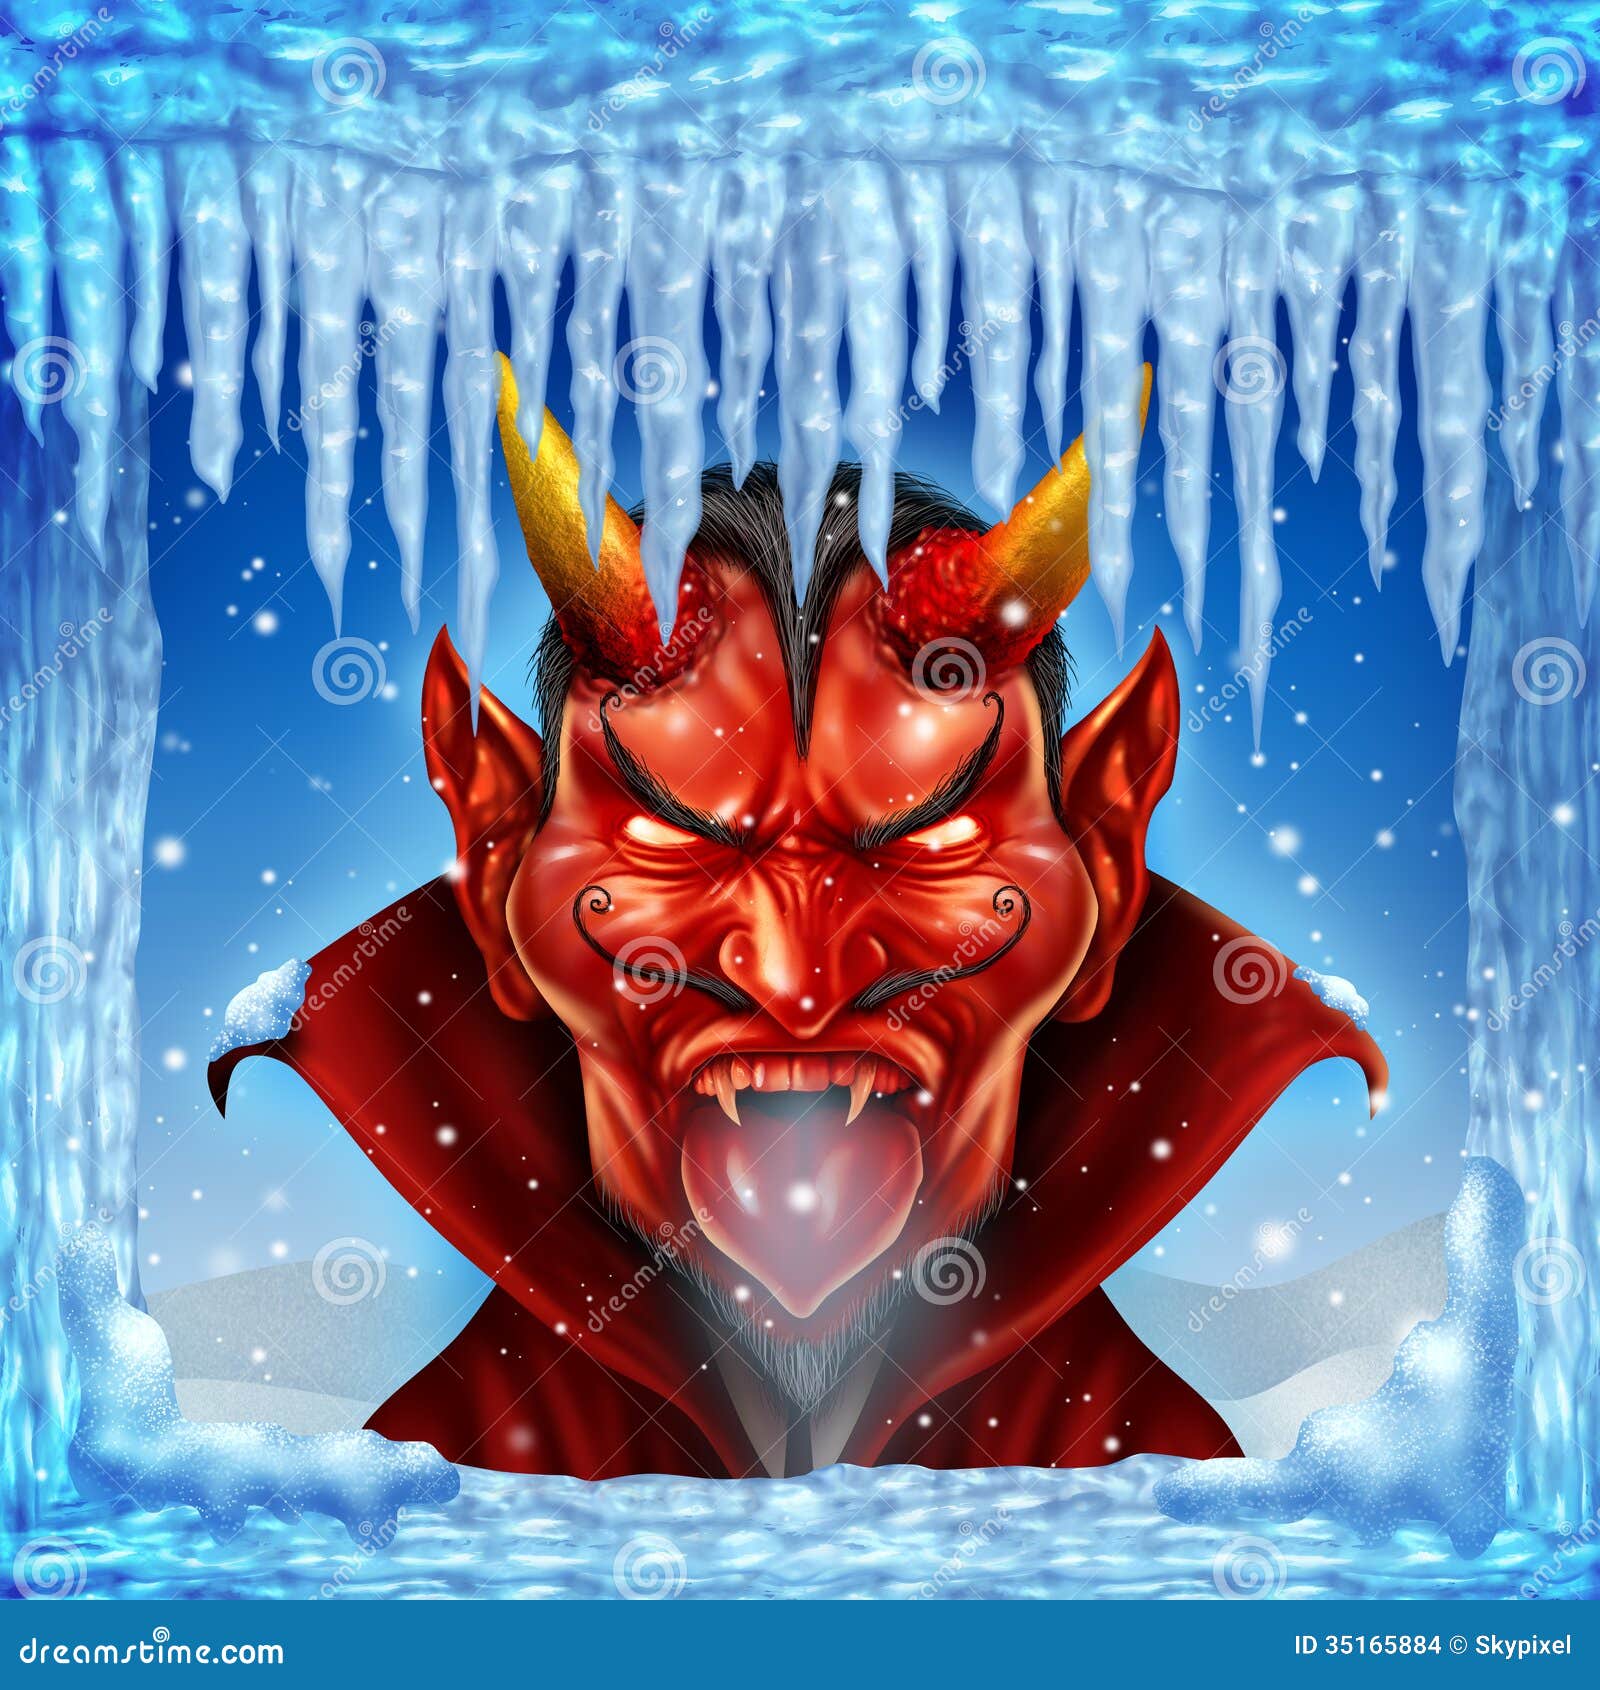 hell-freezes-over-concept-cold-red-devil-character-icy-winter-environment-snow-icicles-blue-sky-35165884.jpg